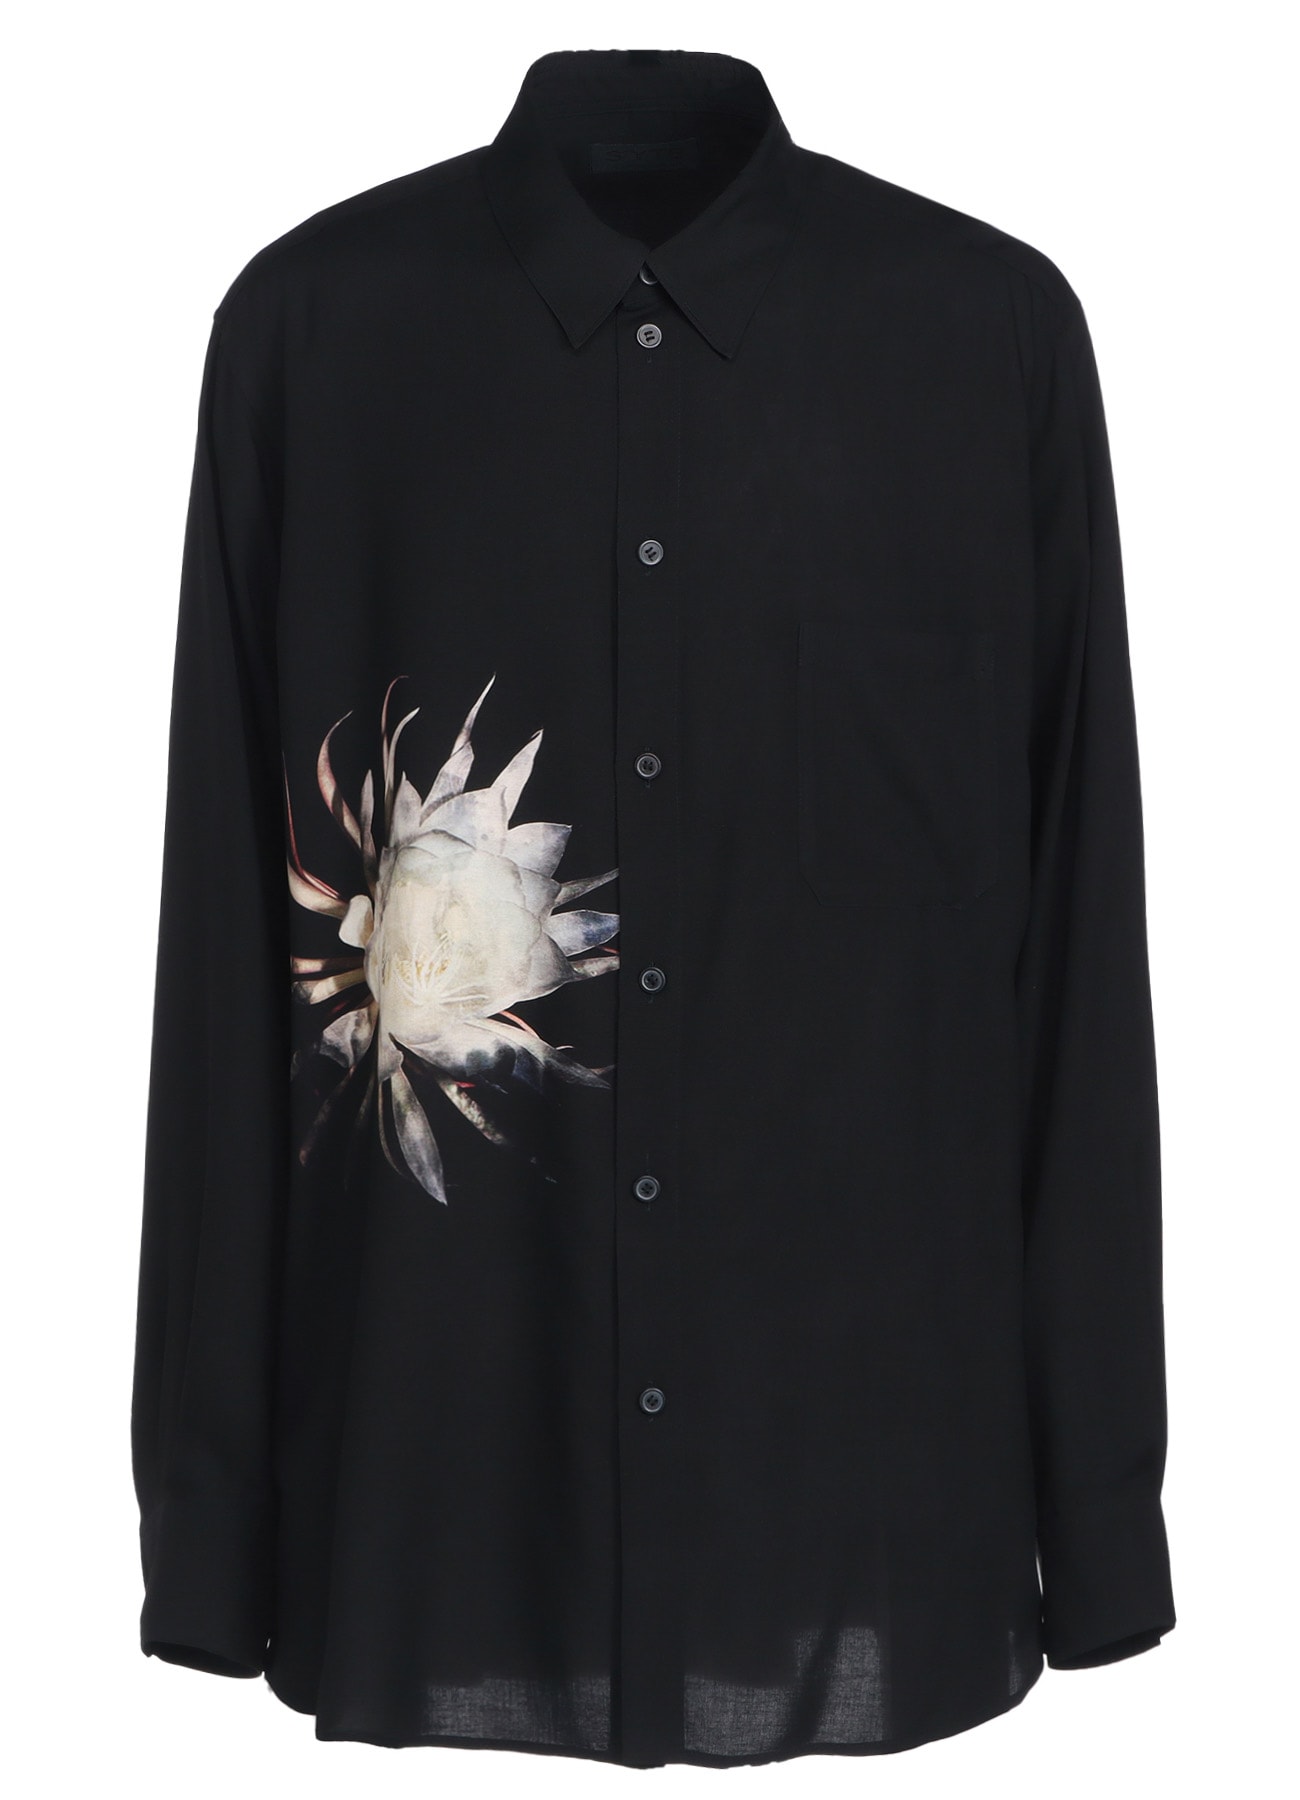 RAYON LOAN “QUEEN OF THE NIGHT“ PRINTED SHIRT